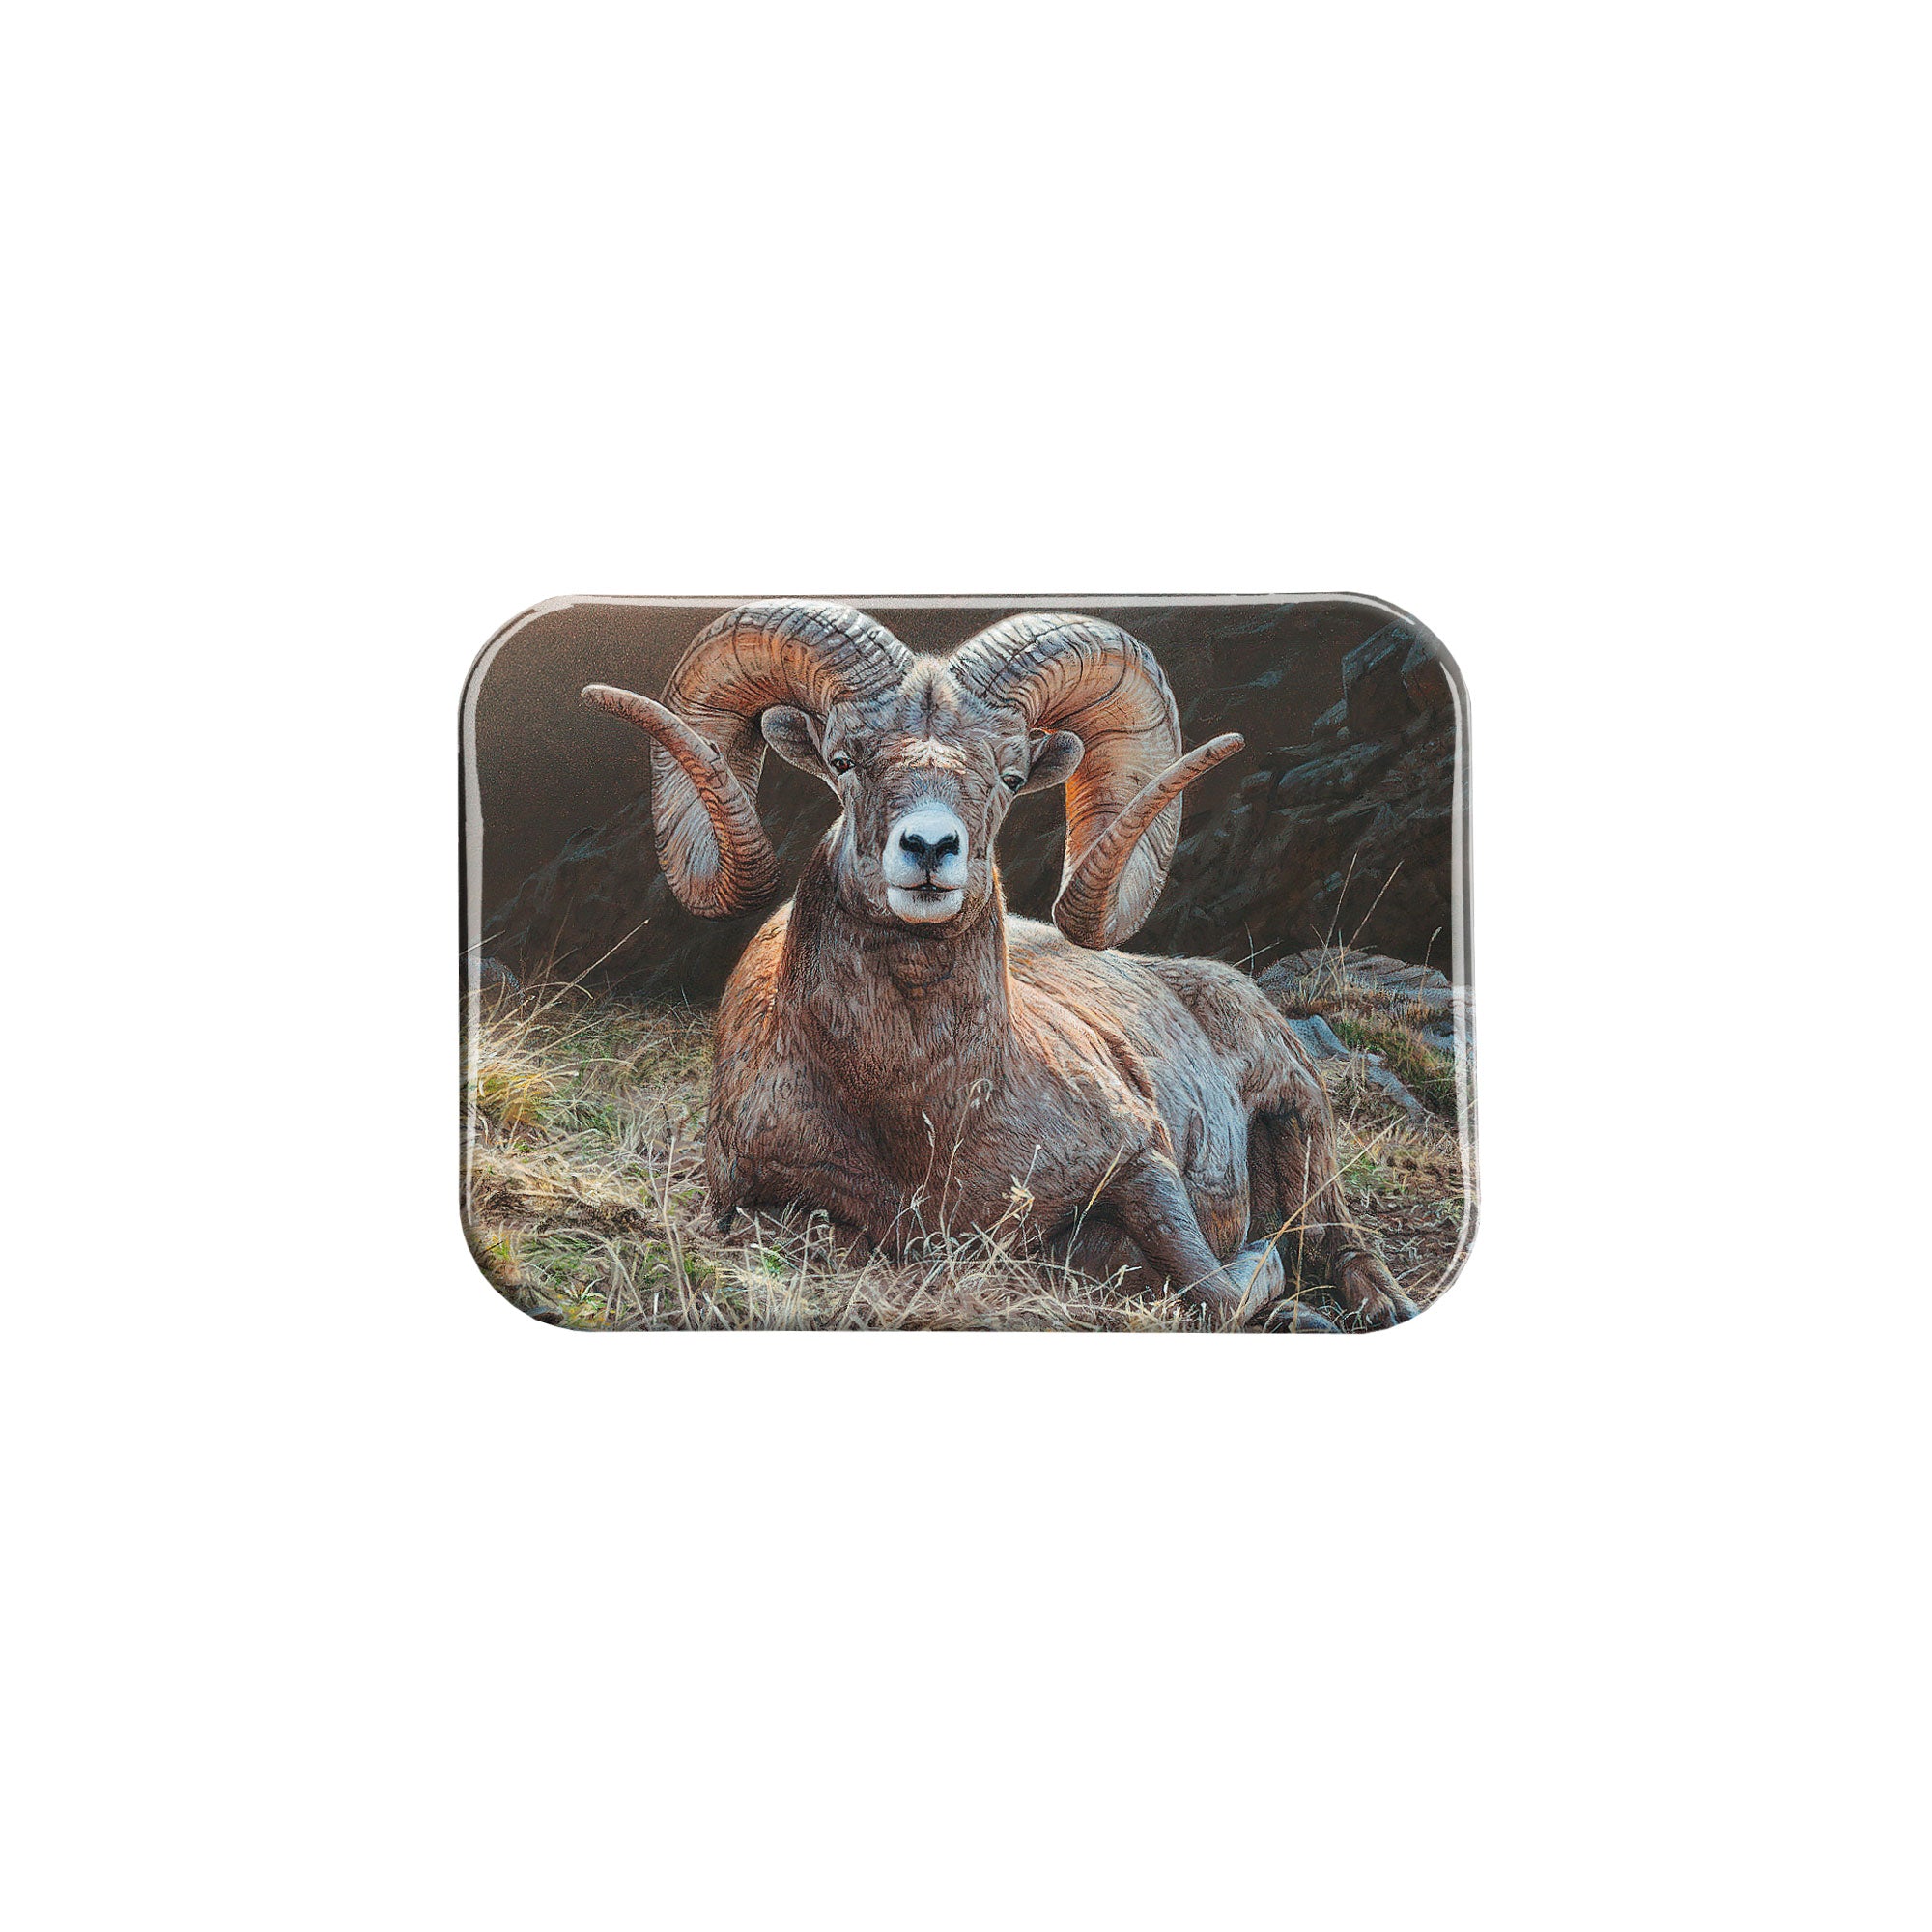 "High Country Repose" - 2.5" X 3.5" Rectangle Fridge Magnets